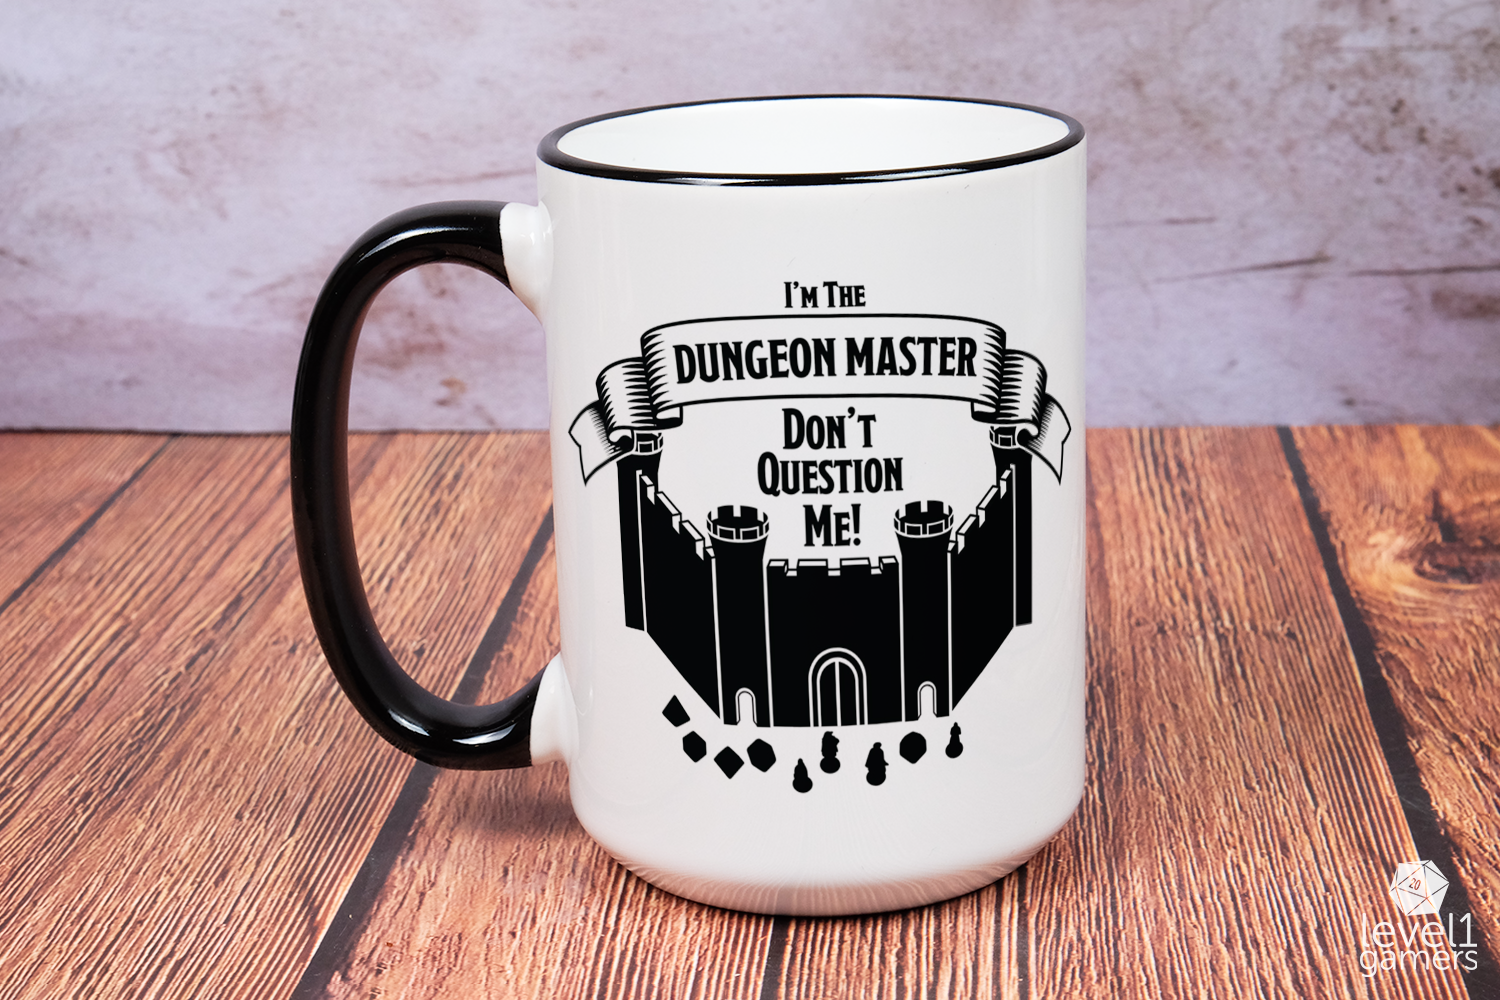 I'm The Dungeon Master, Don't Question Me! Mug  Level 1 Gamers   